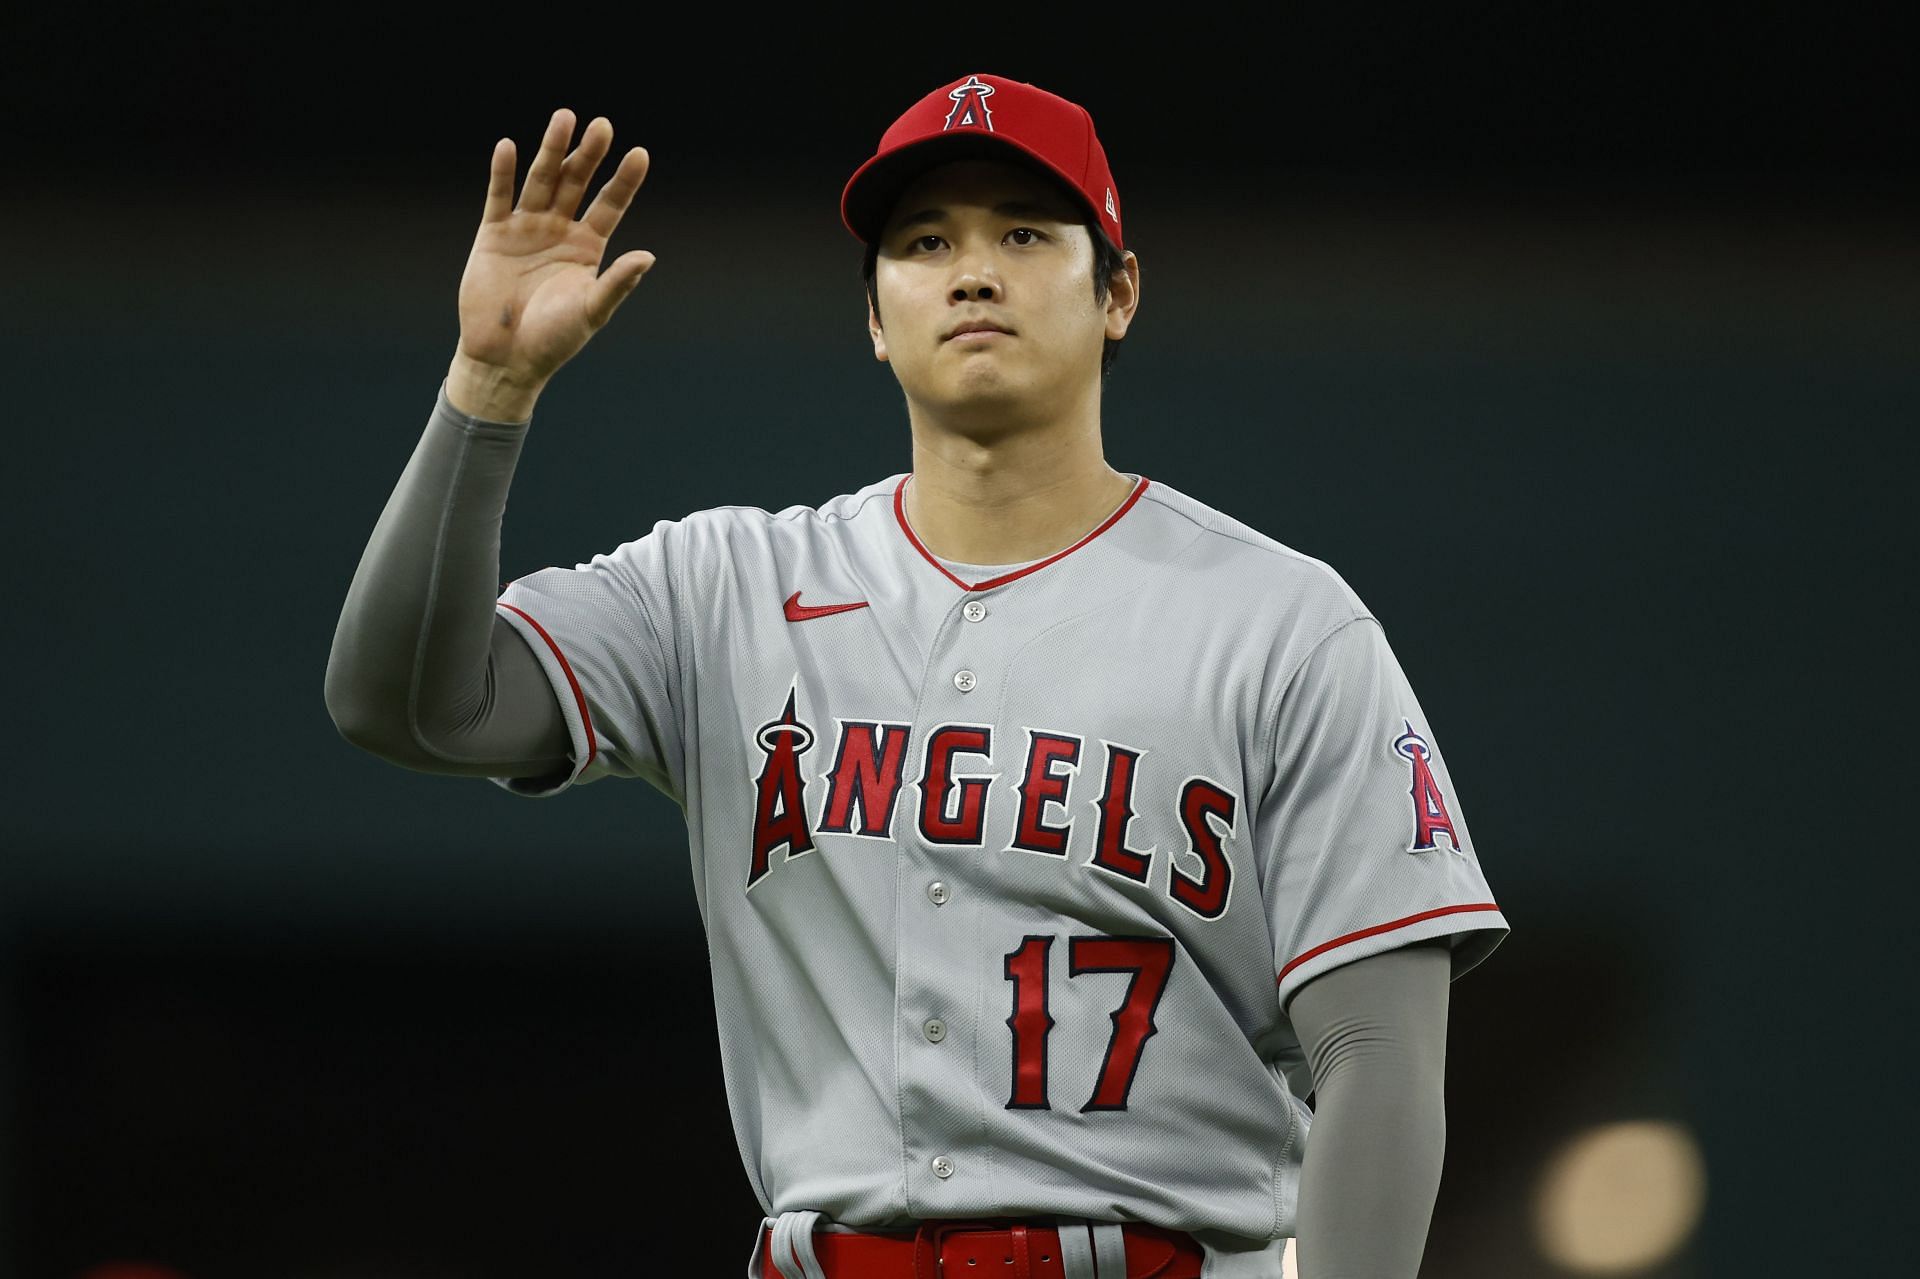 Shohei Ohtani of the Los Angeles Angels waves to fans before a game against the Texas Rangers.